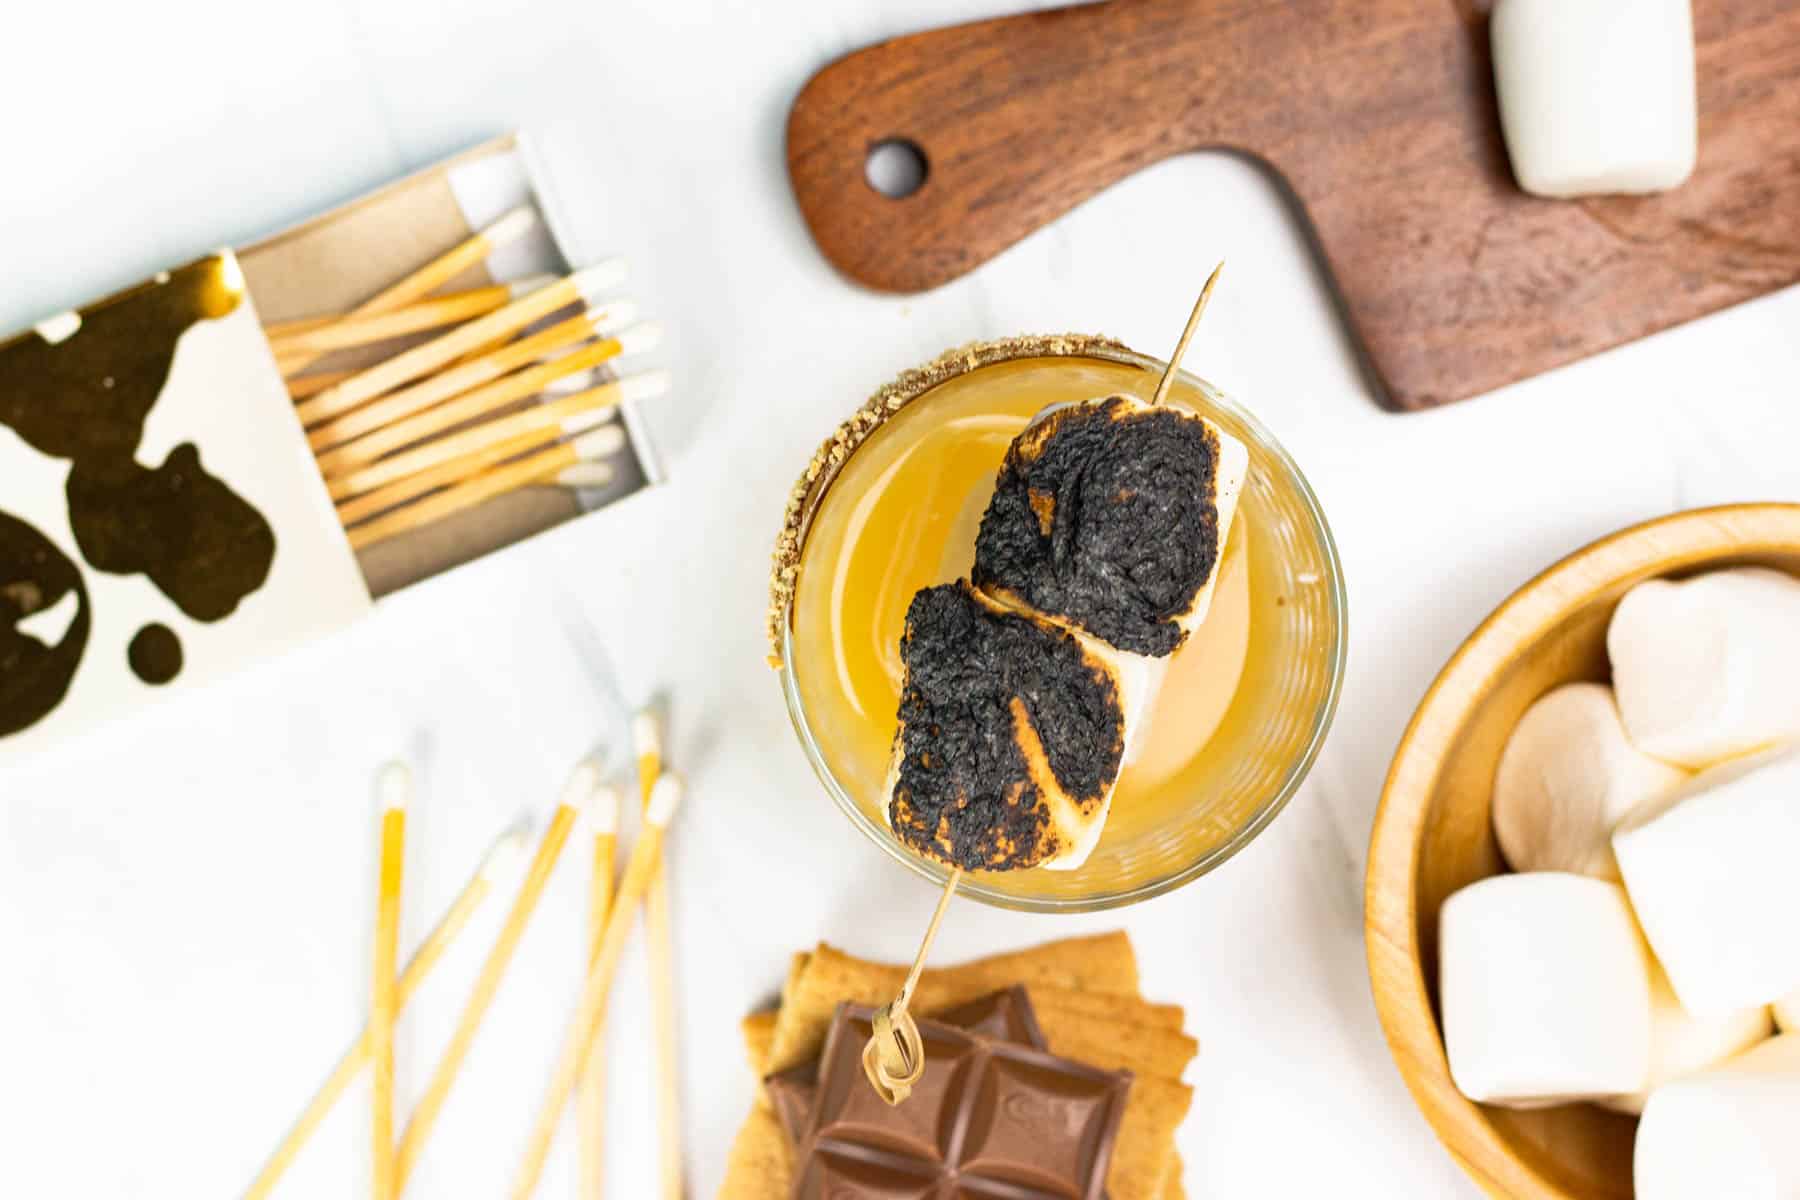 S'mores ingredients and matches surrounding a cocktail with charred marshmallows.